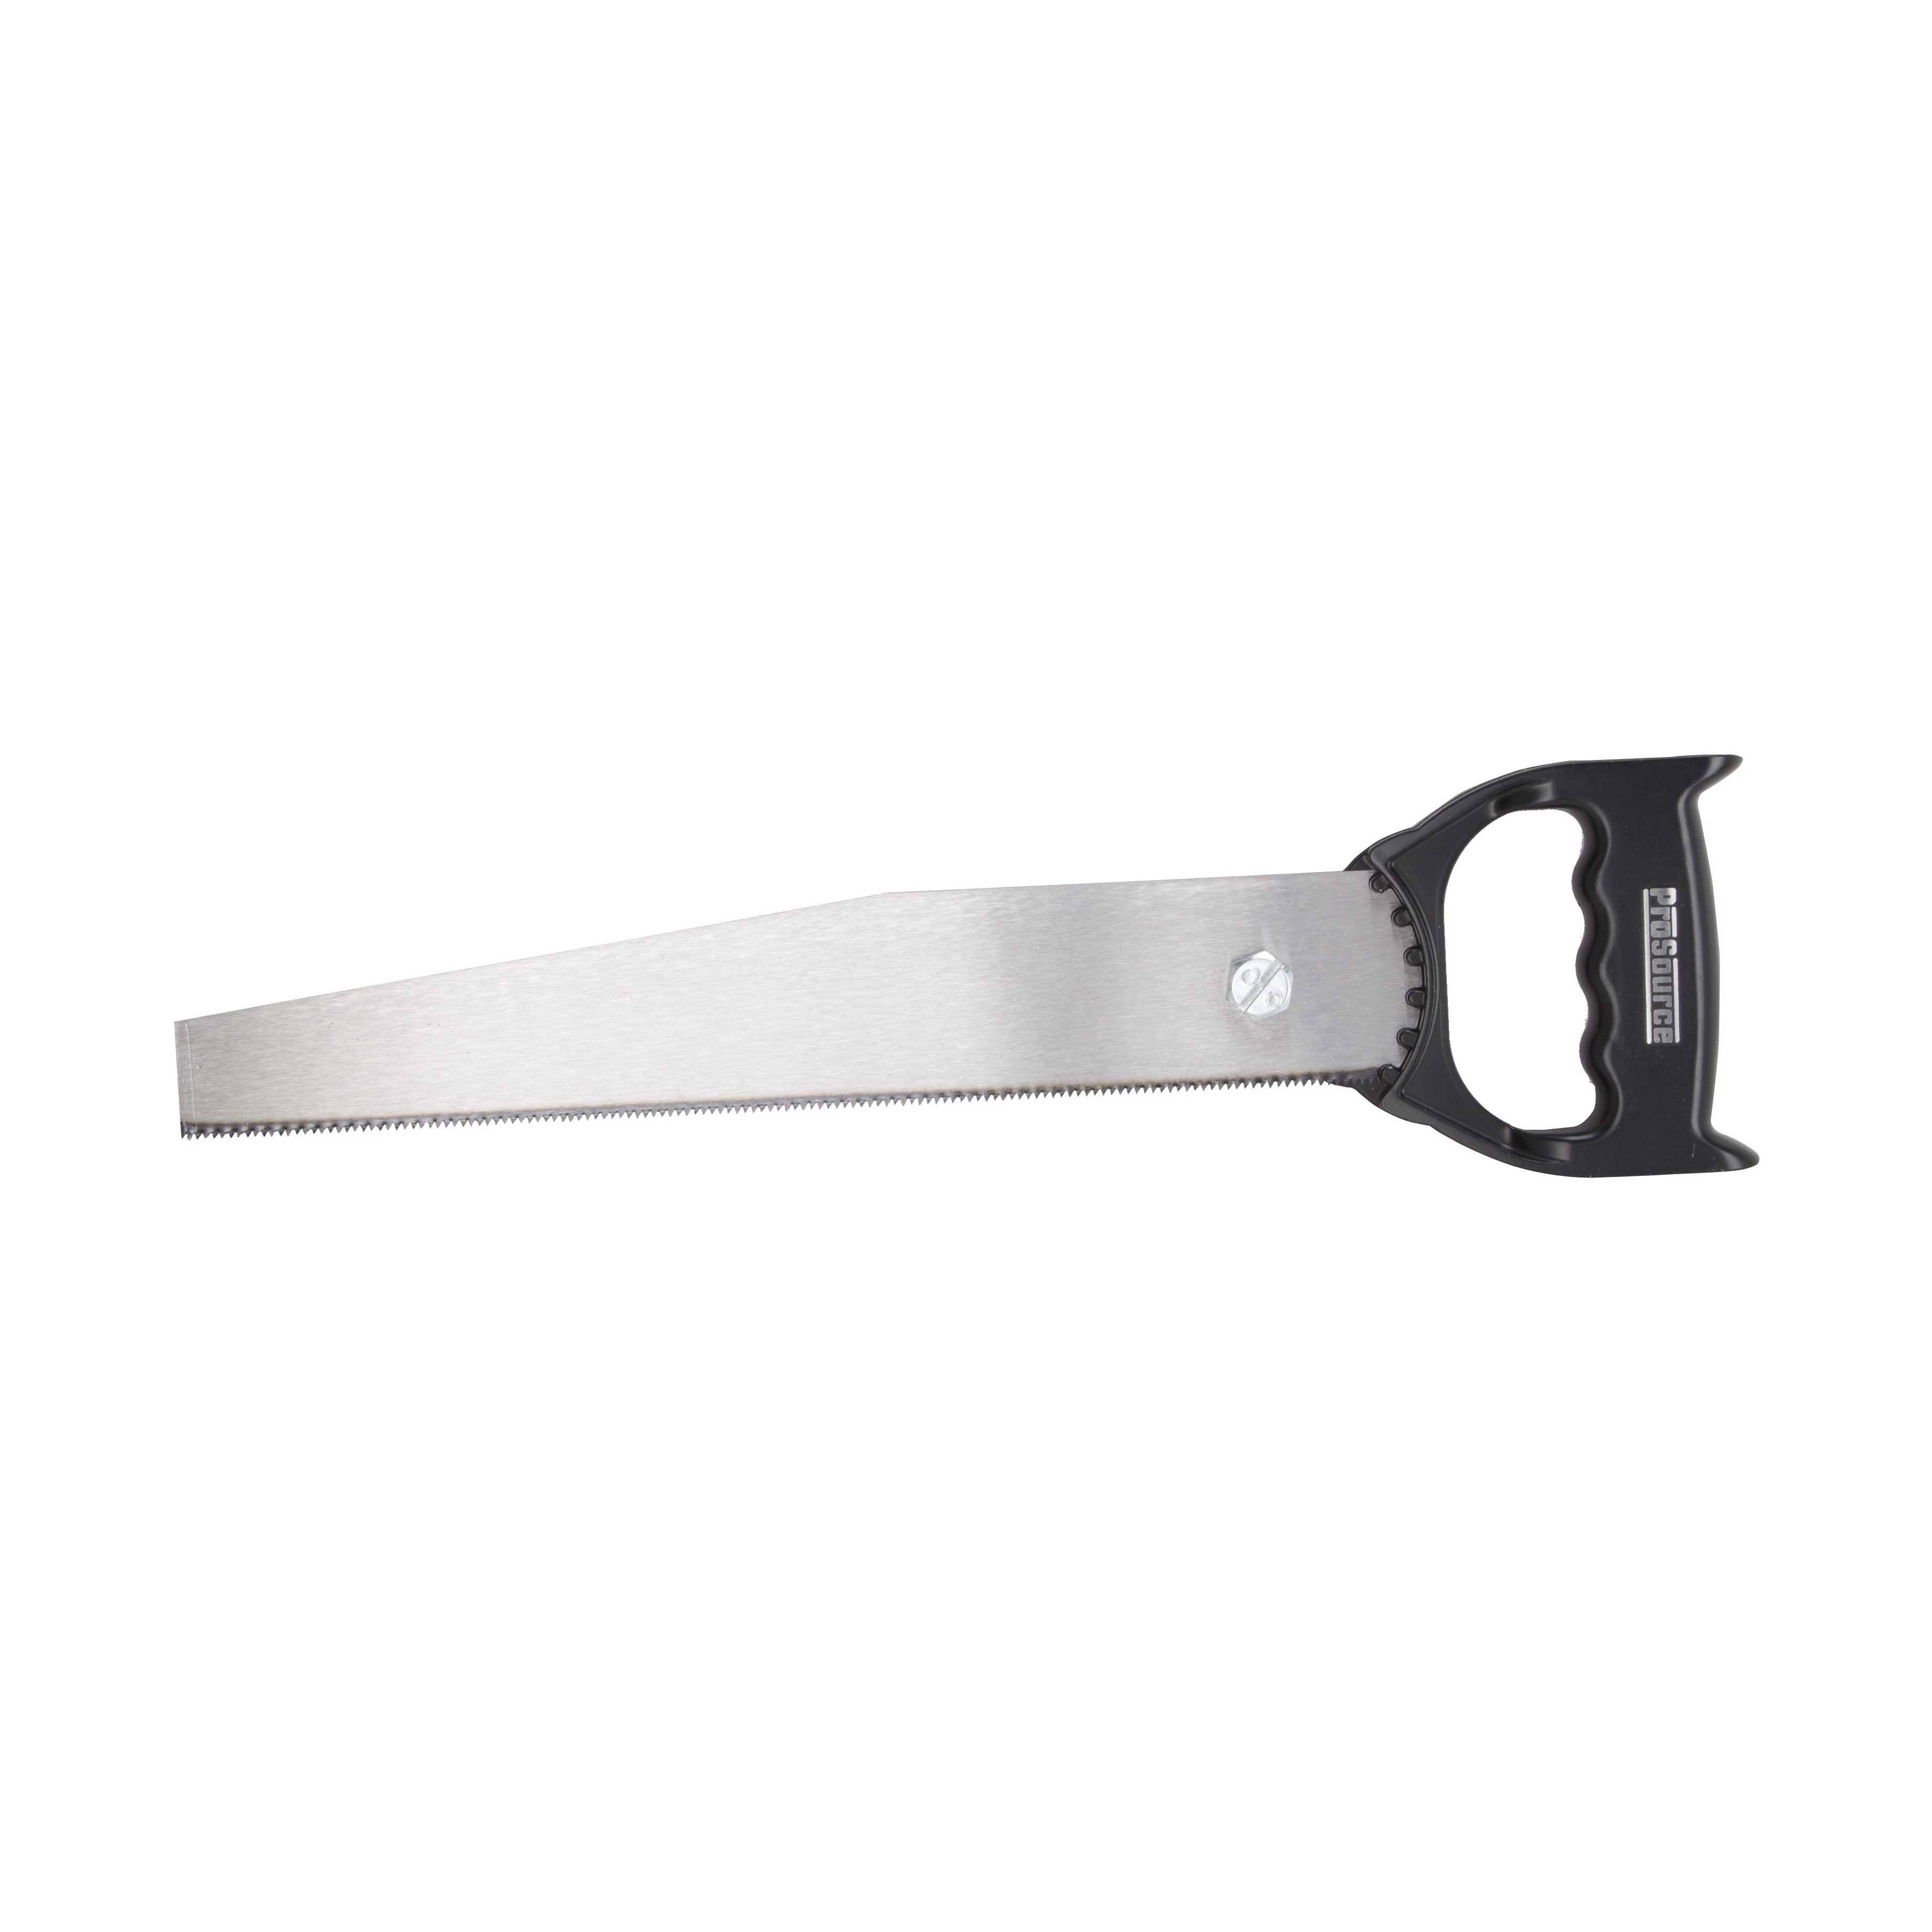 PMB-502 Saw Blade, 0.9 mm Thick, Steel, Clear Lacquer